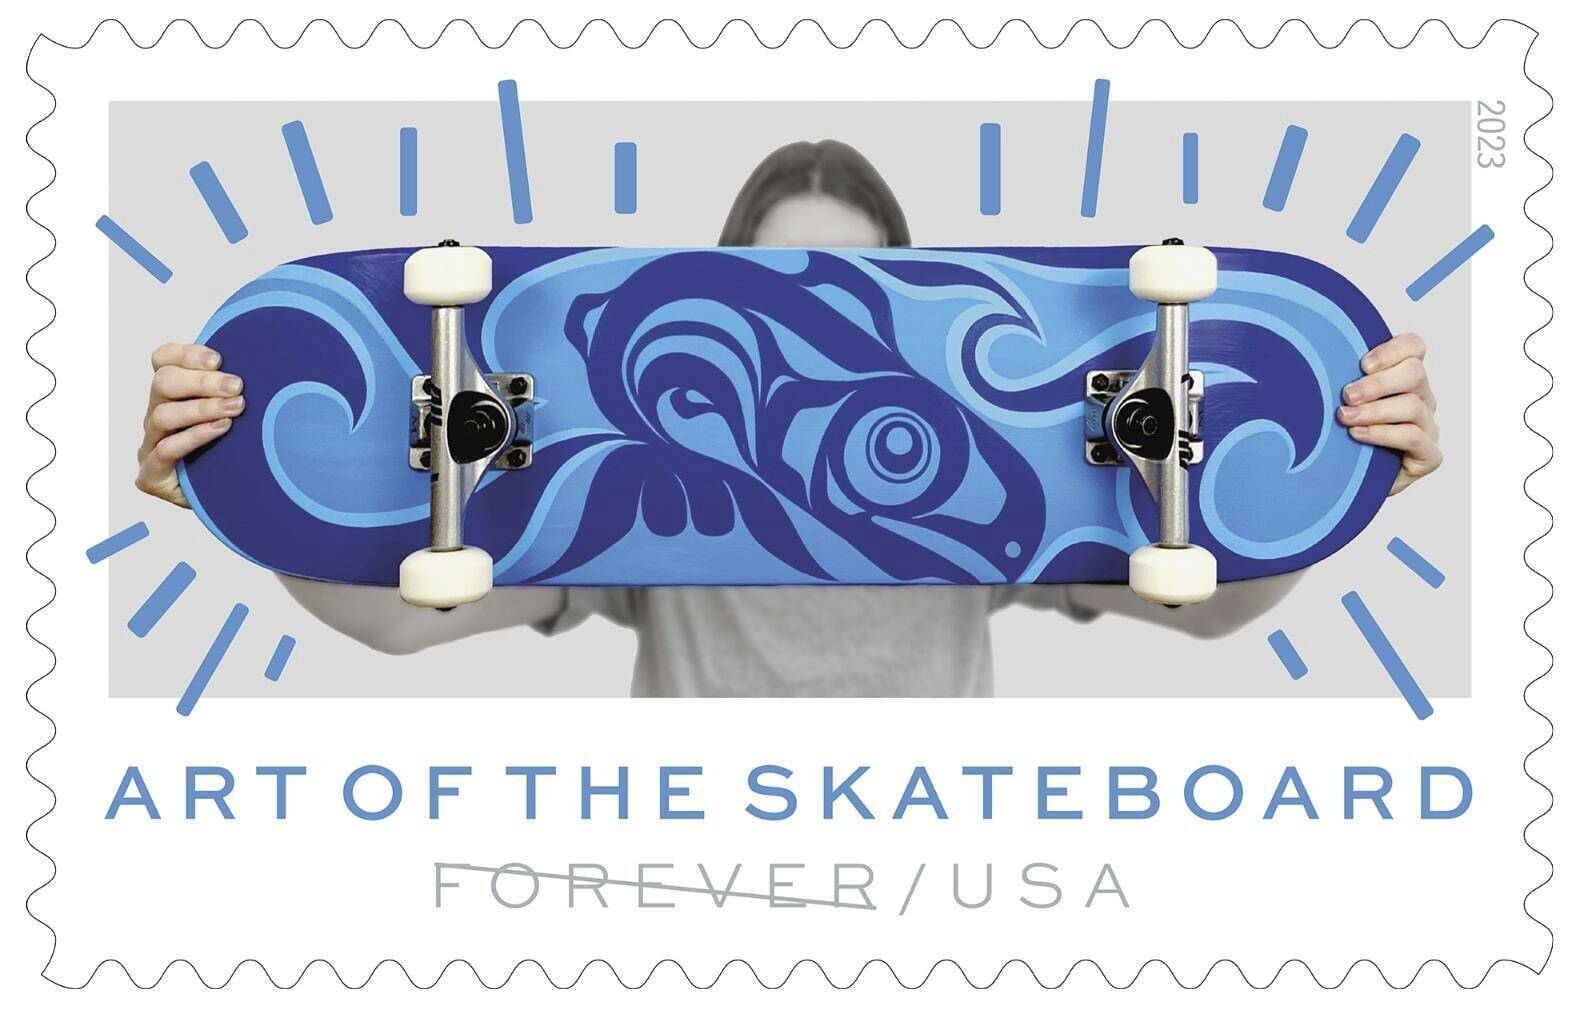 This image provided by the U.S. Postal Service shows an “Art of the Skateboard” Forever stamp with a design by Juneau artist Crystal Kaakeeyaa Worl, who is Tlingit and Athabascan. The agency on Friday, March 24, 2023, is debuting the stamps at a Phoenix skate park. The stamps feature designs from four artists from around the country, including two Indigenous artists. (Courtesy of USPS)